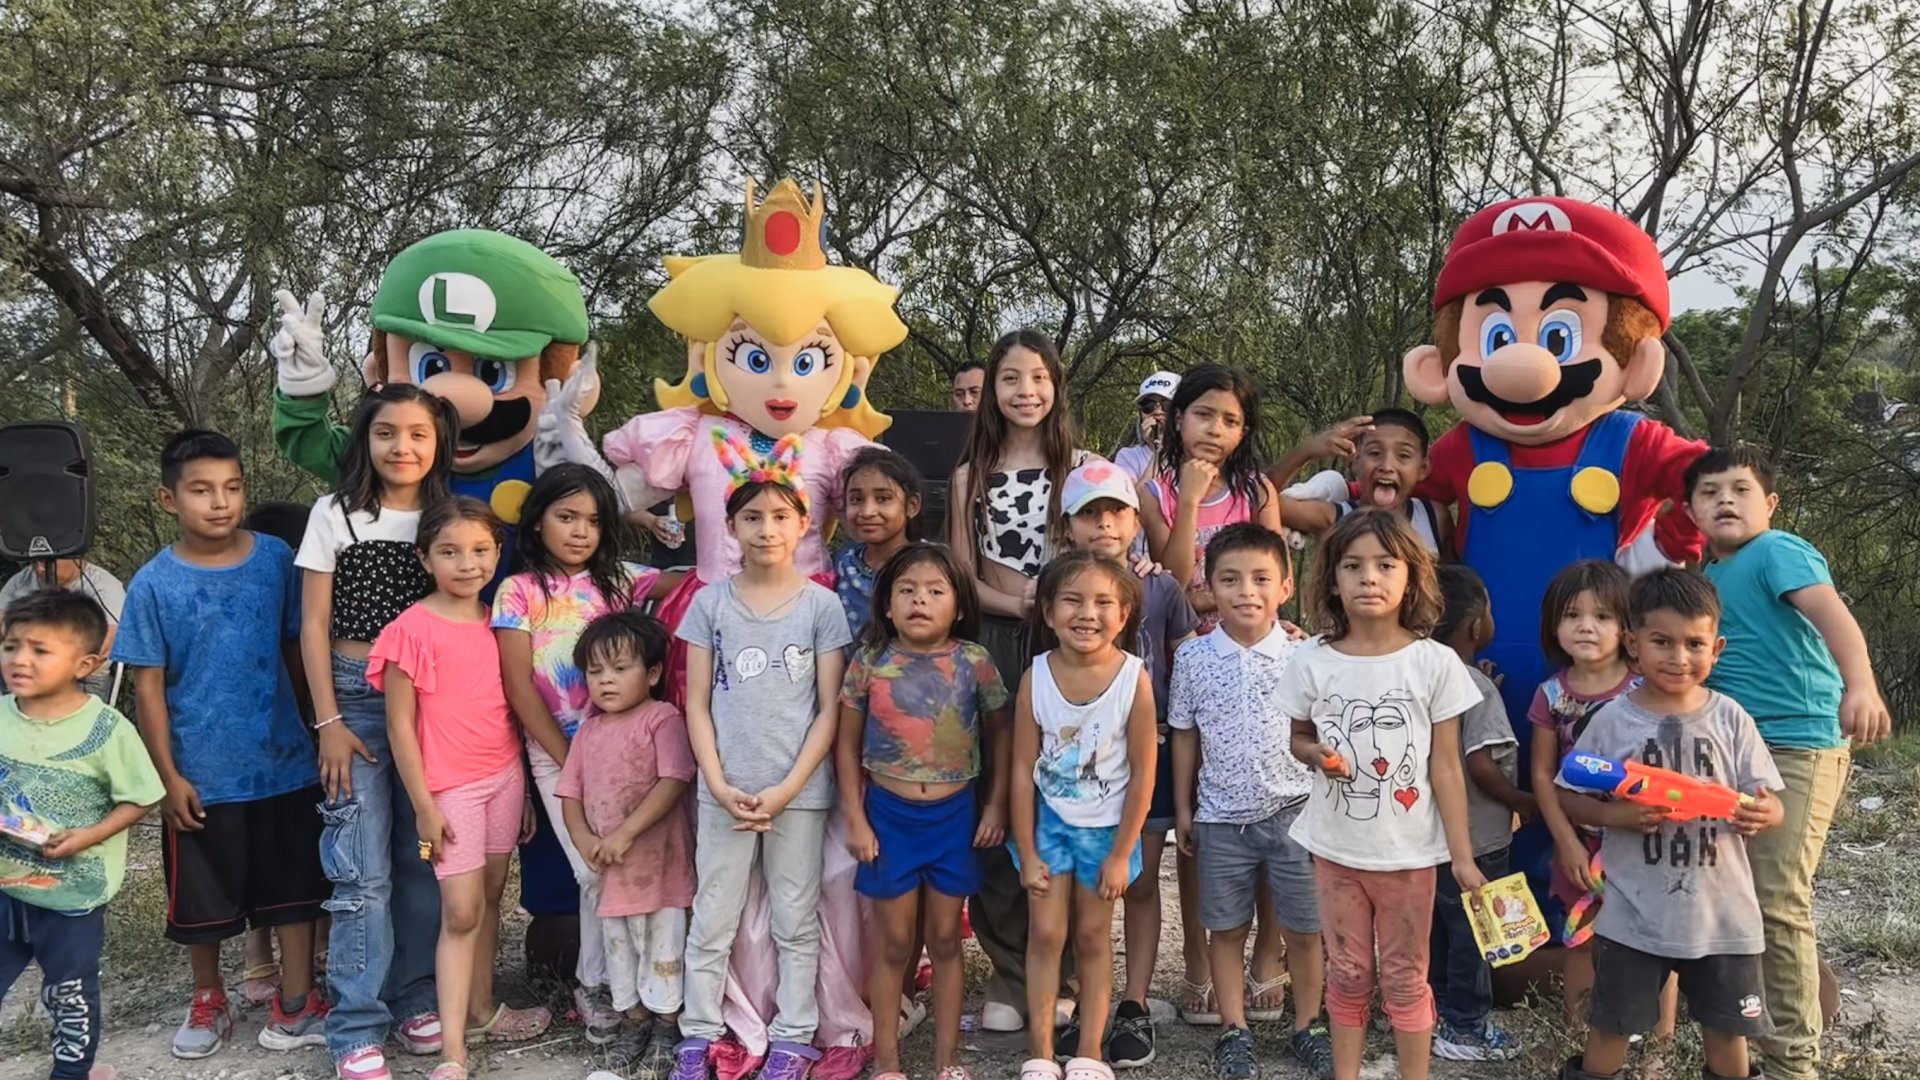 Children and Super Mario characters